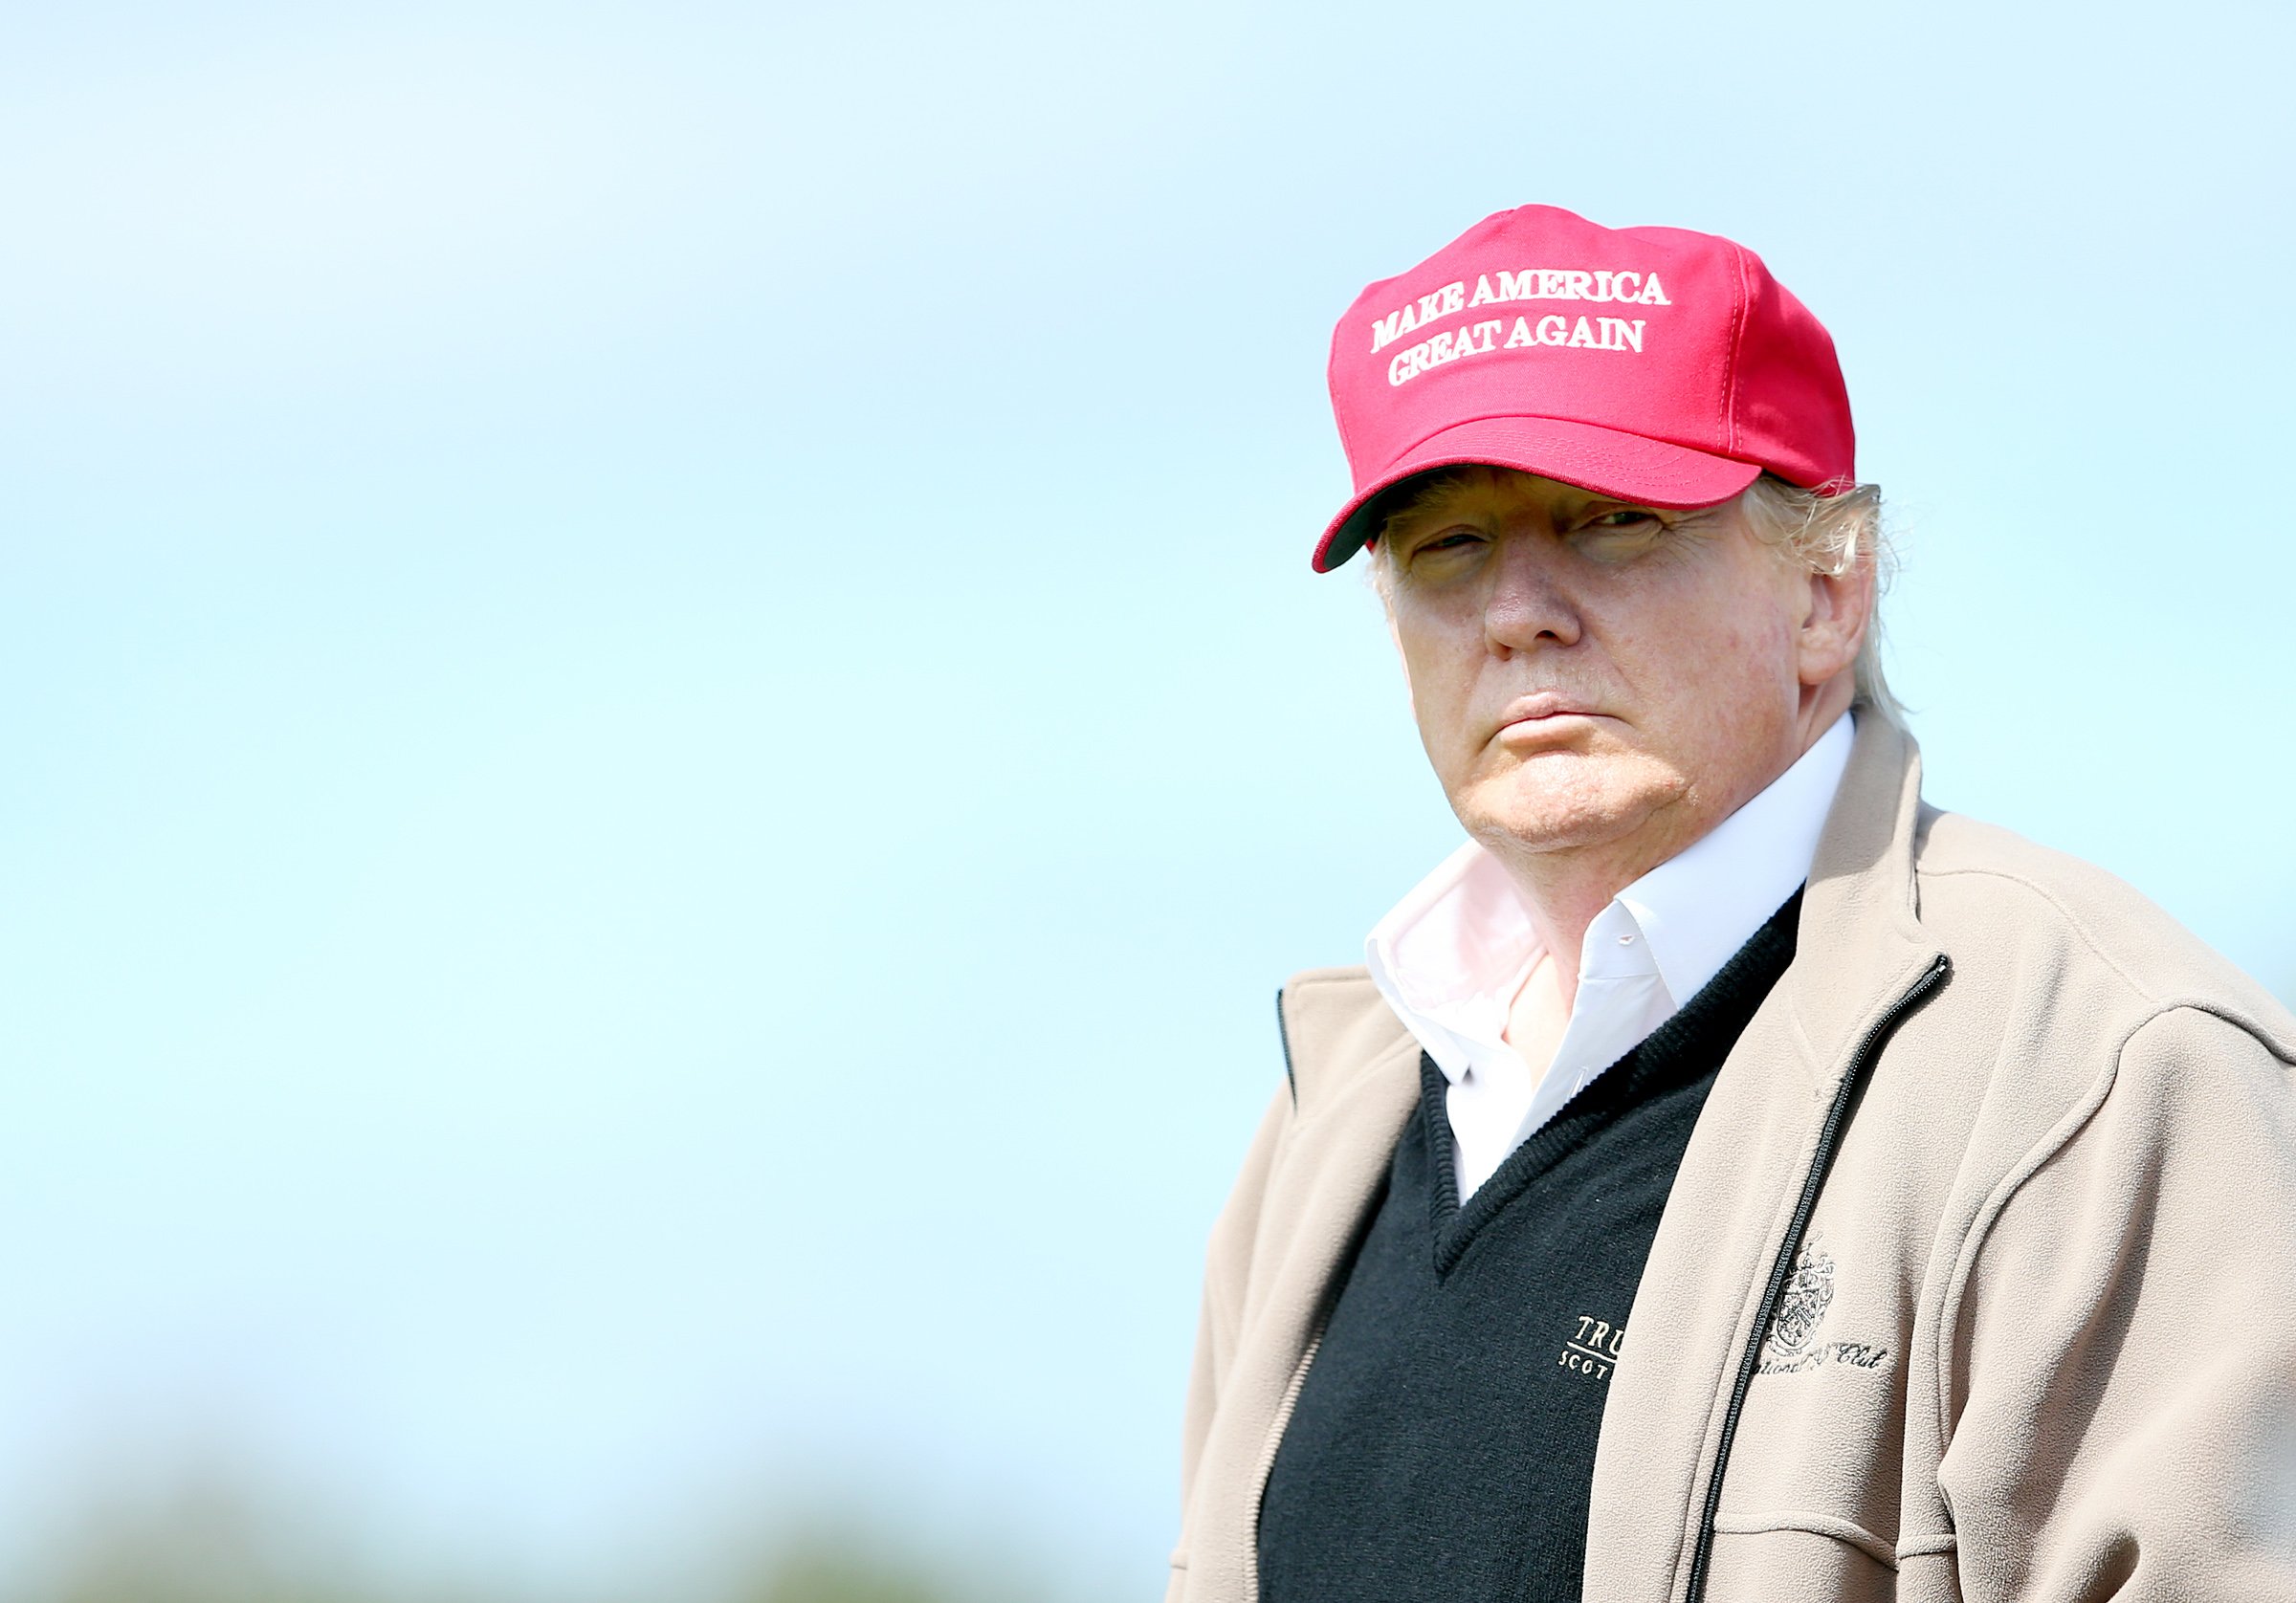 Presidential contender Donald Trump looks on at the 16th green on the 1st first day of the Women's British Open golf championship on the Turnberry golf course in Turnberry, Scotland on July 30, 2015. (Scott Heppell—AP)